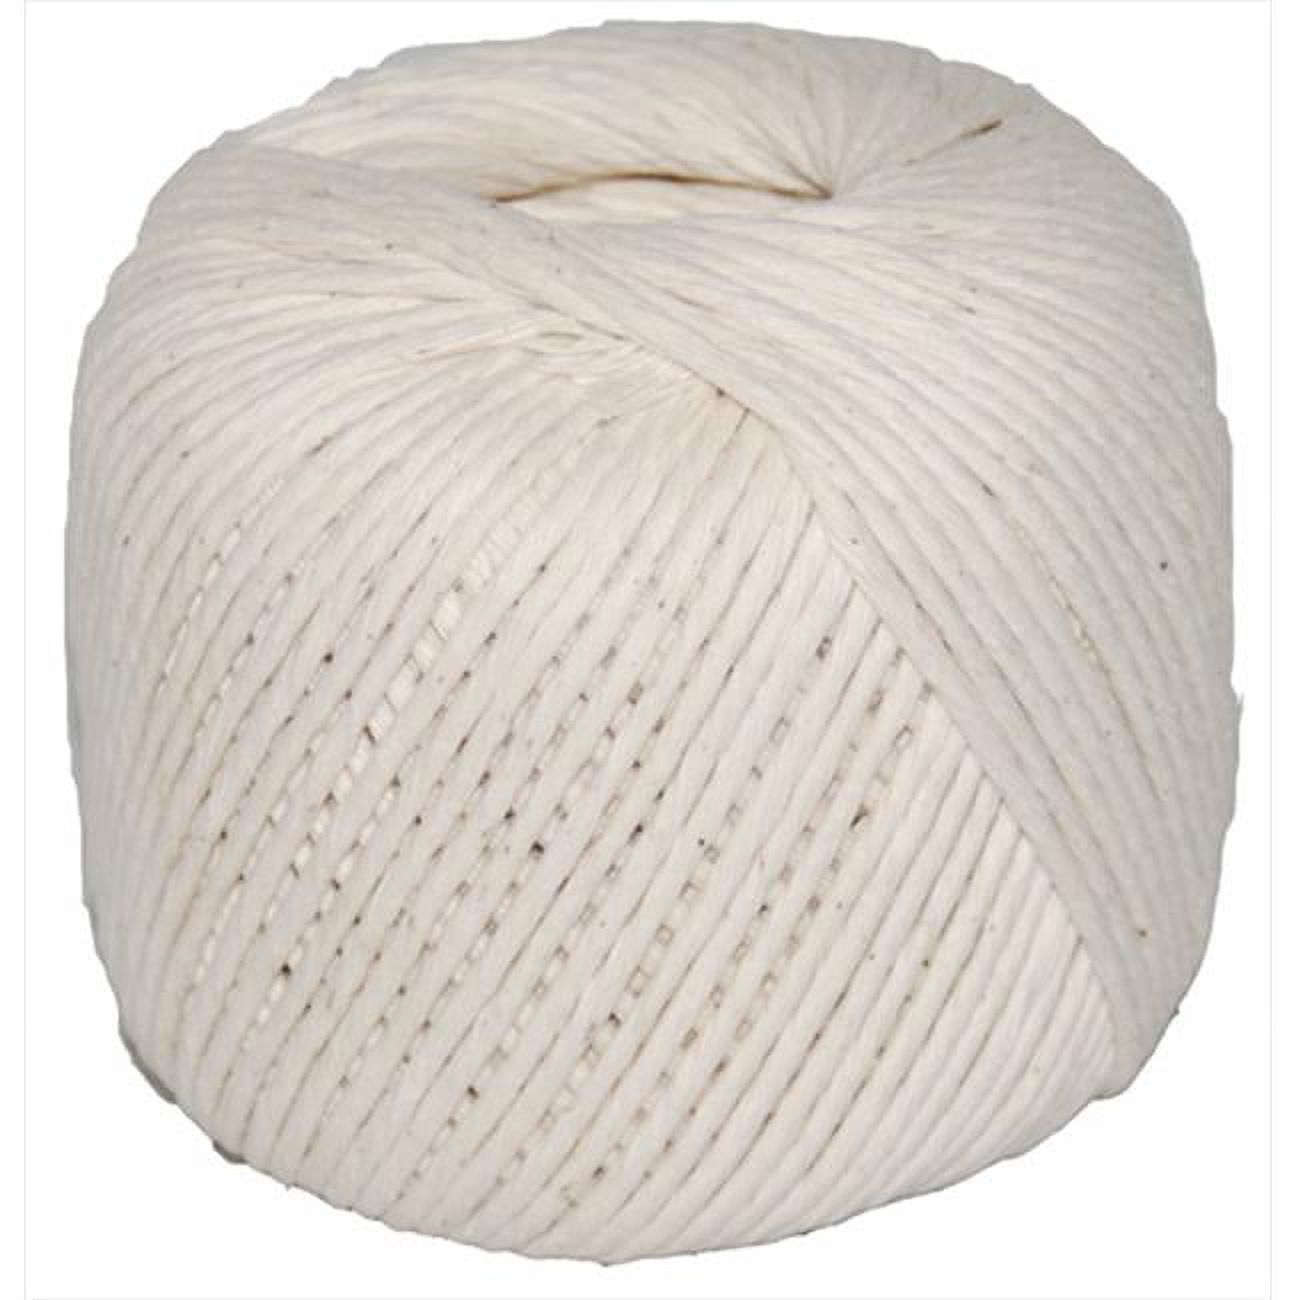 T.W . Evans Cordage #36 POLISHED BEEF COTTON TWINE 400' BALL - image 1 of 1